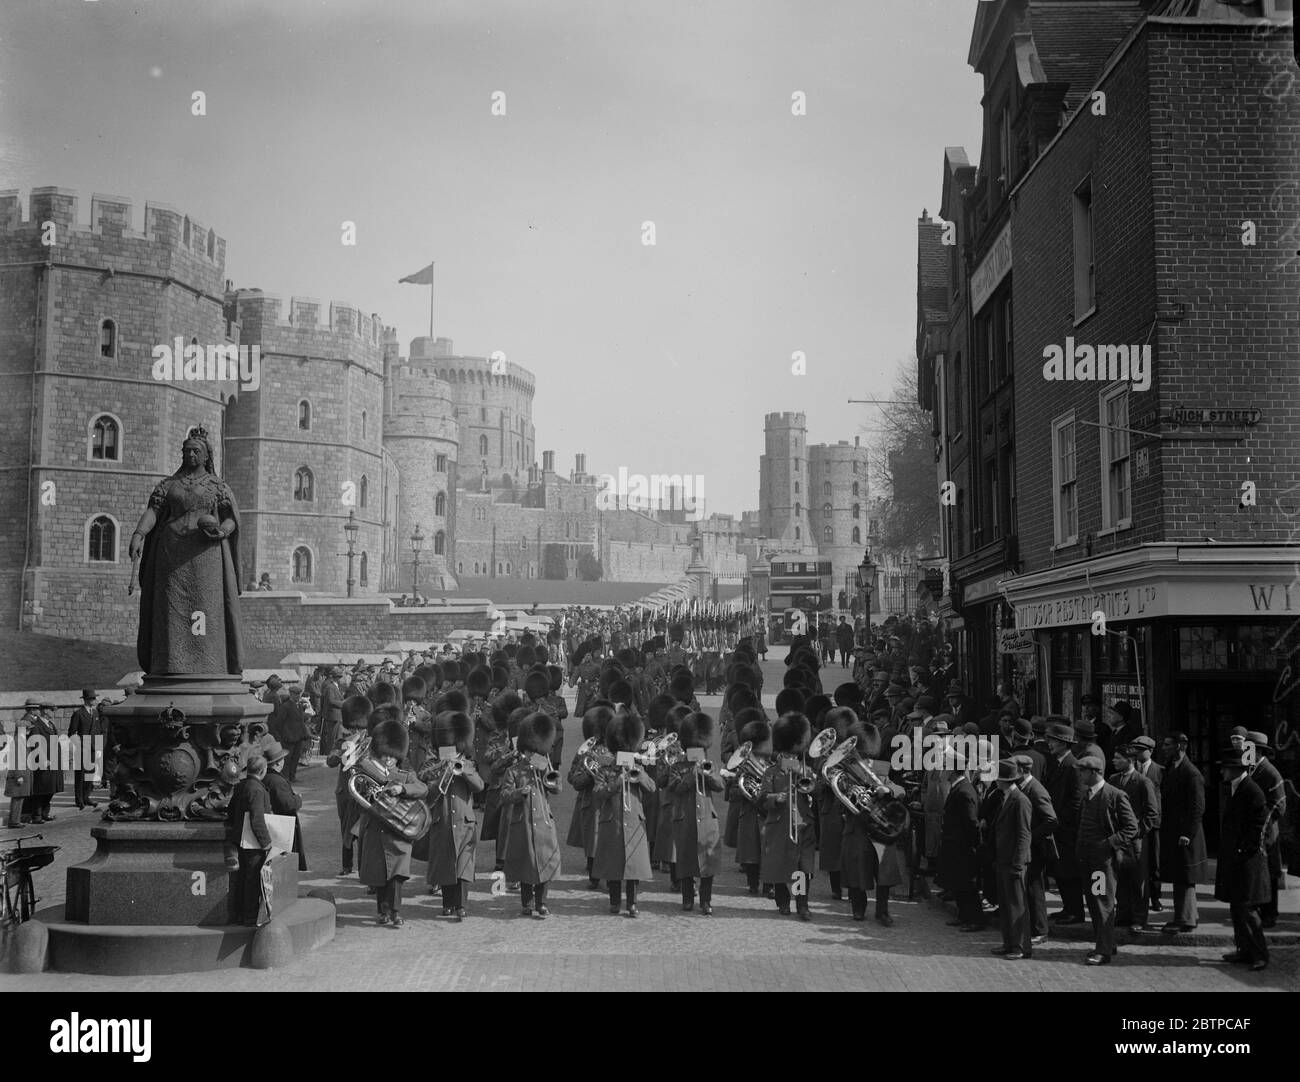 Pageantry at Windsor . Members of the 1st Battalion of the Scots Guards leaving WIndsor Castle after the changing of the Guard Ceremony . 1 April 1930 Stock Photo